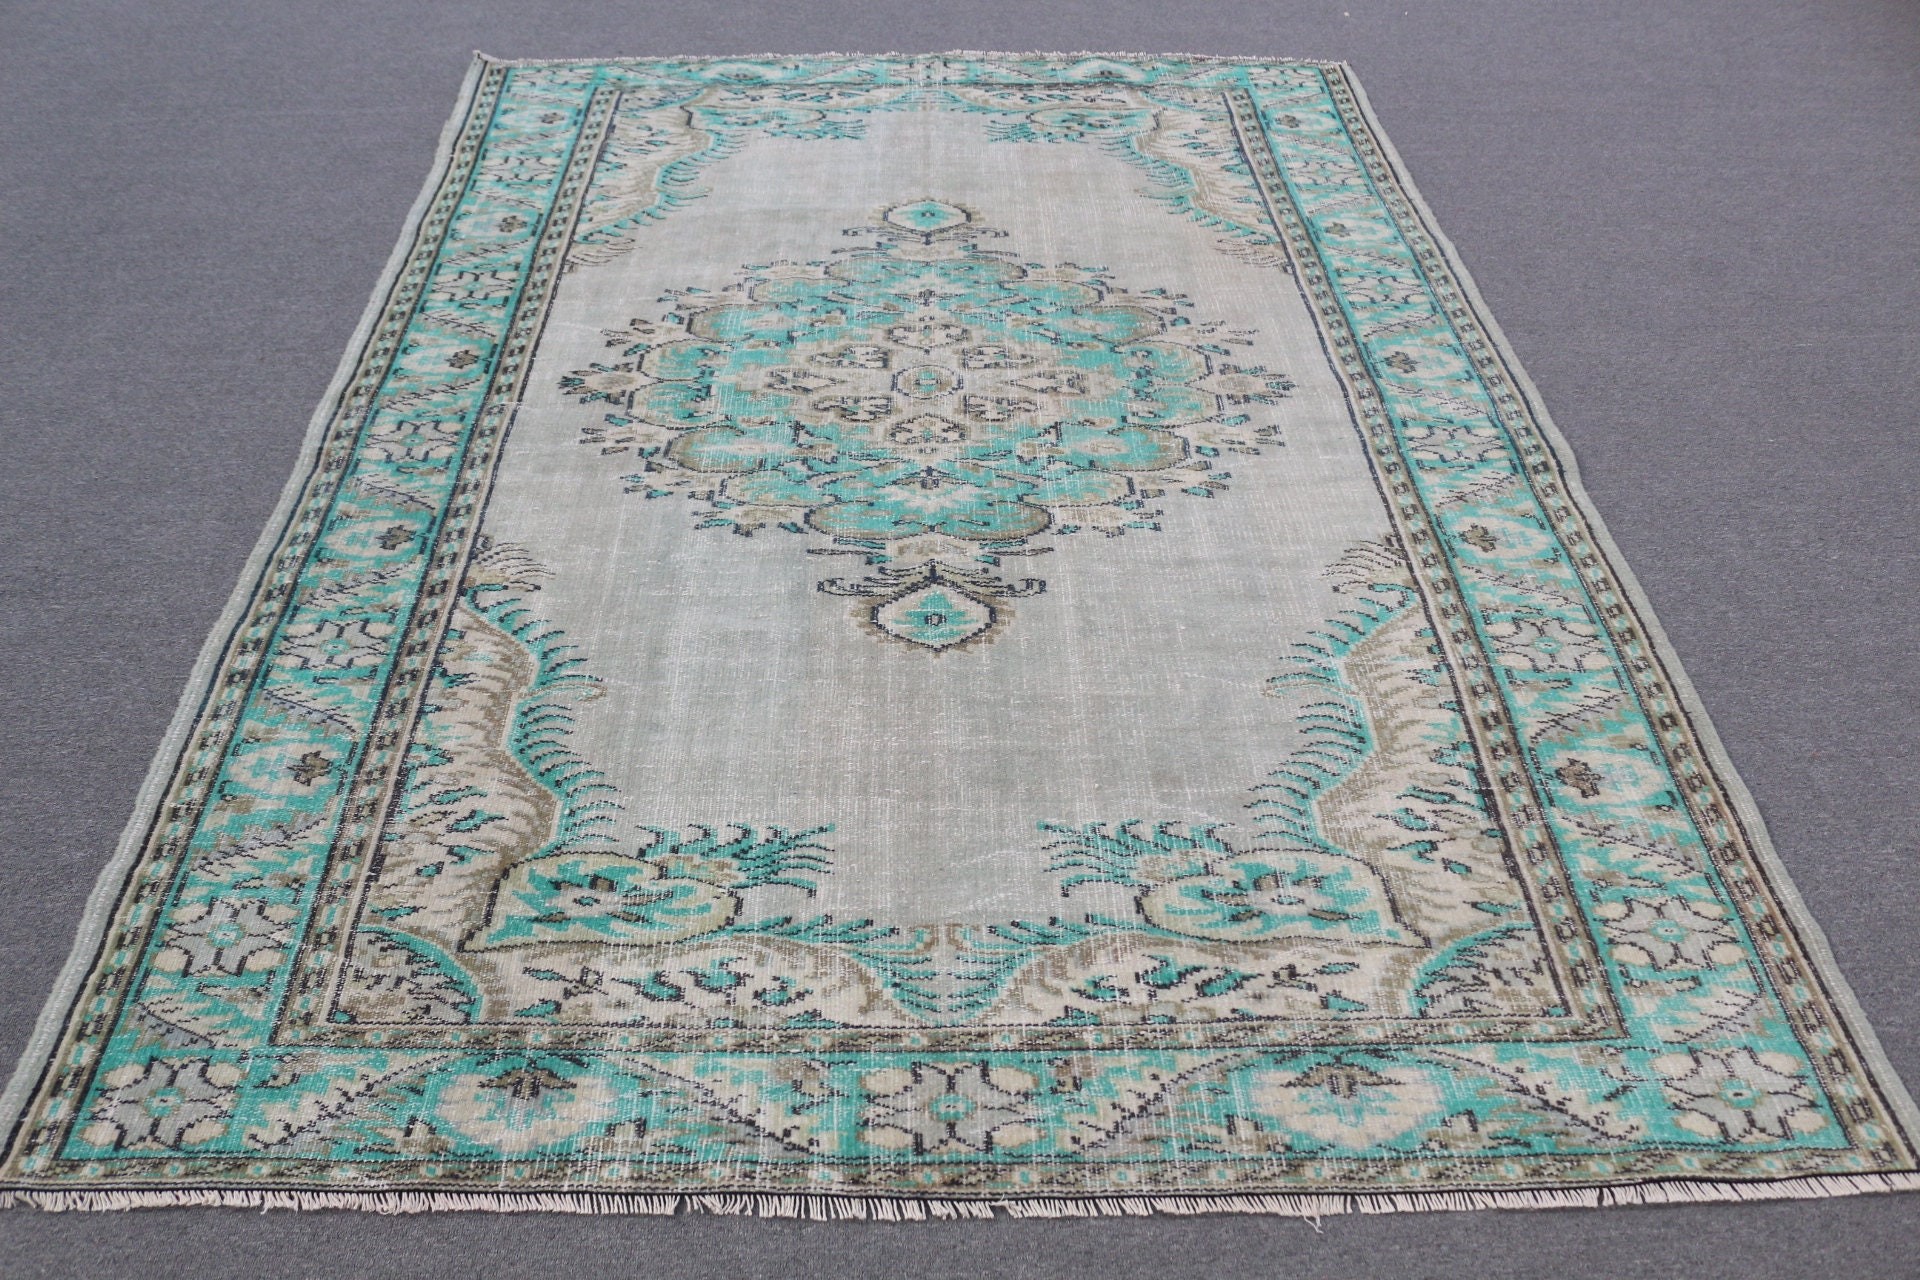 Kitchen Rugs, Bedroom Rug, Vintage Rugs, Rugs for Salon, Turkish Rugs, Green Cool Rug, 6x8.9 ft Large Rugs, Dining Room Rugs